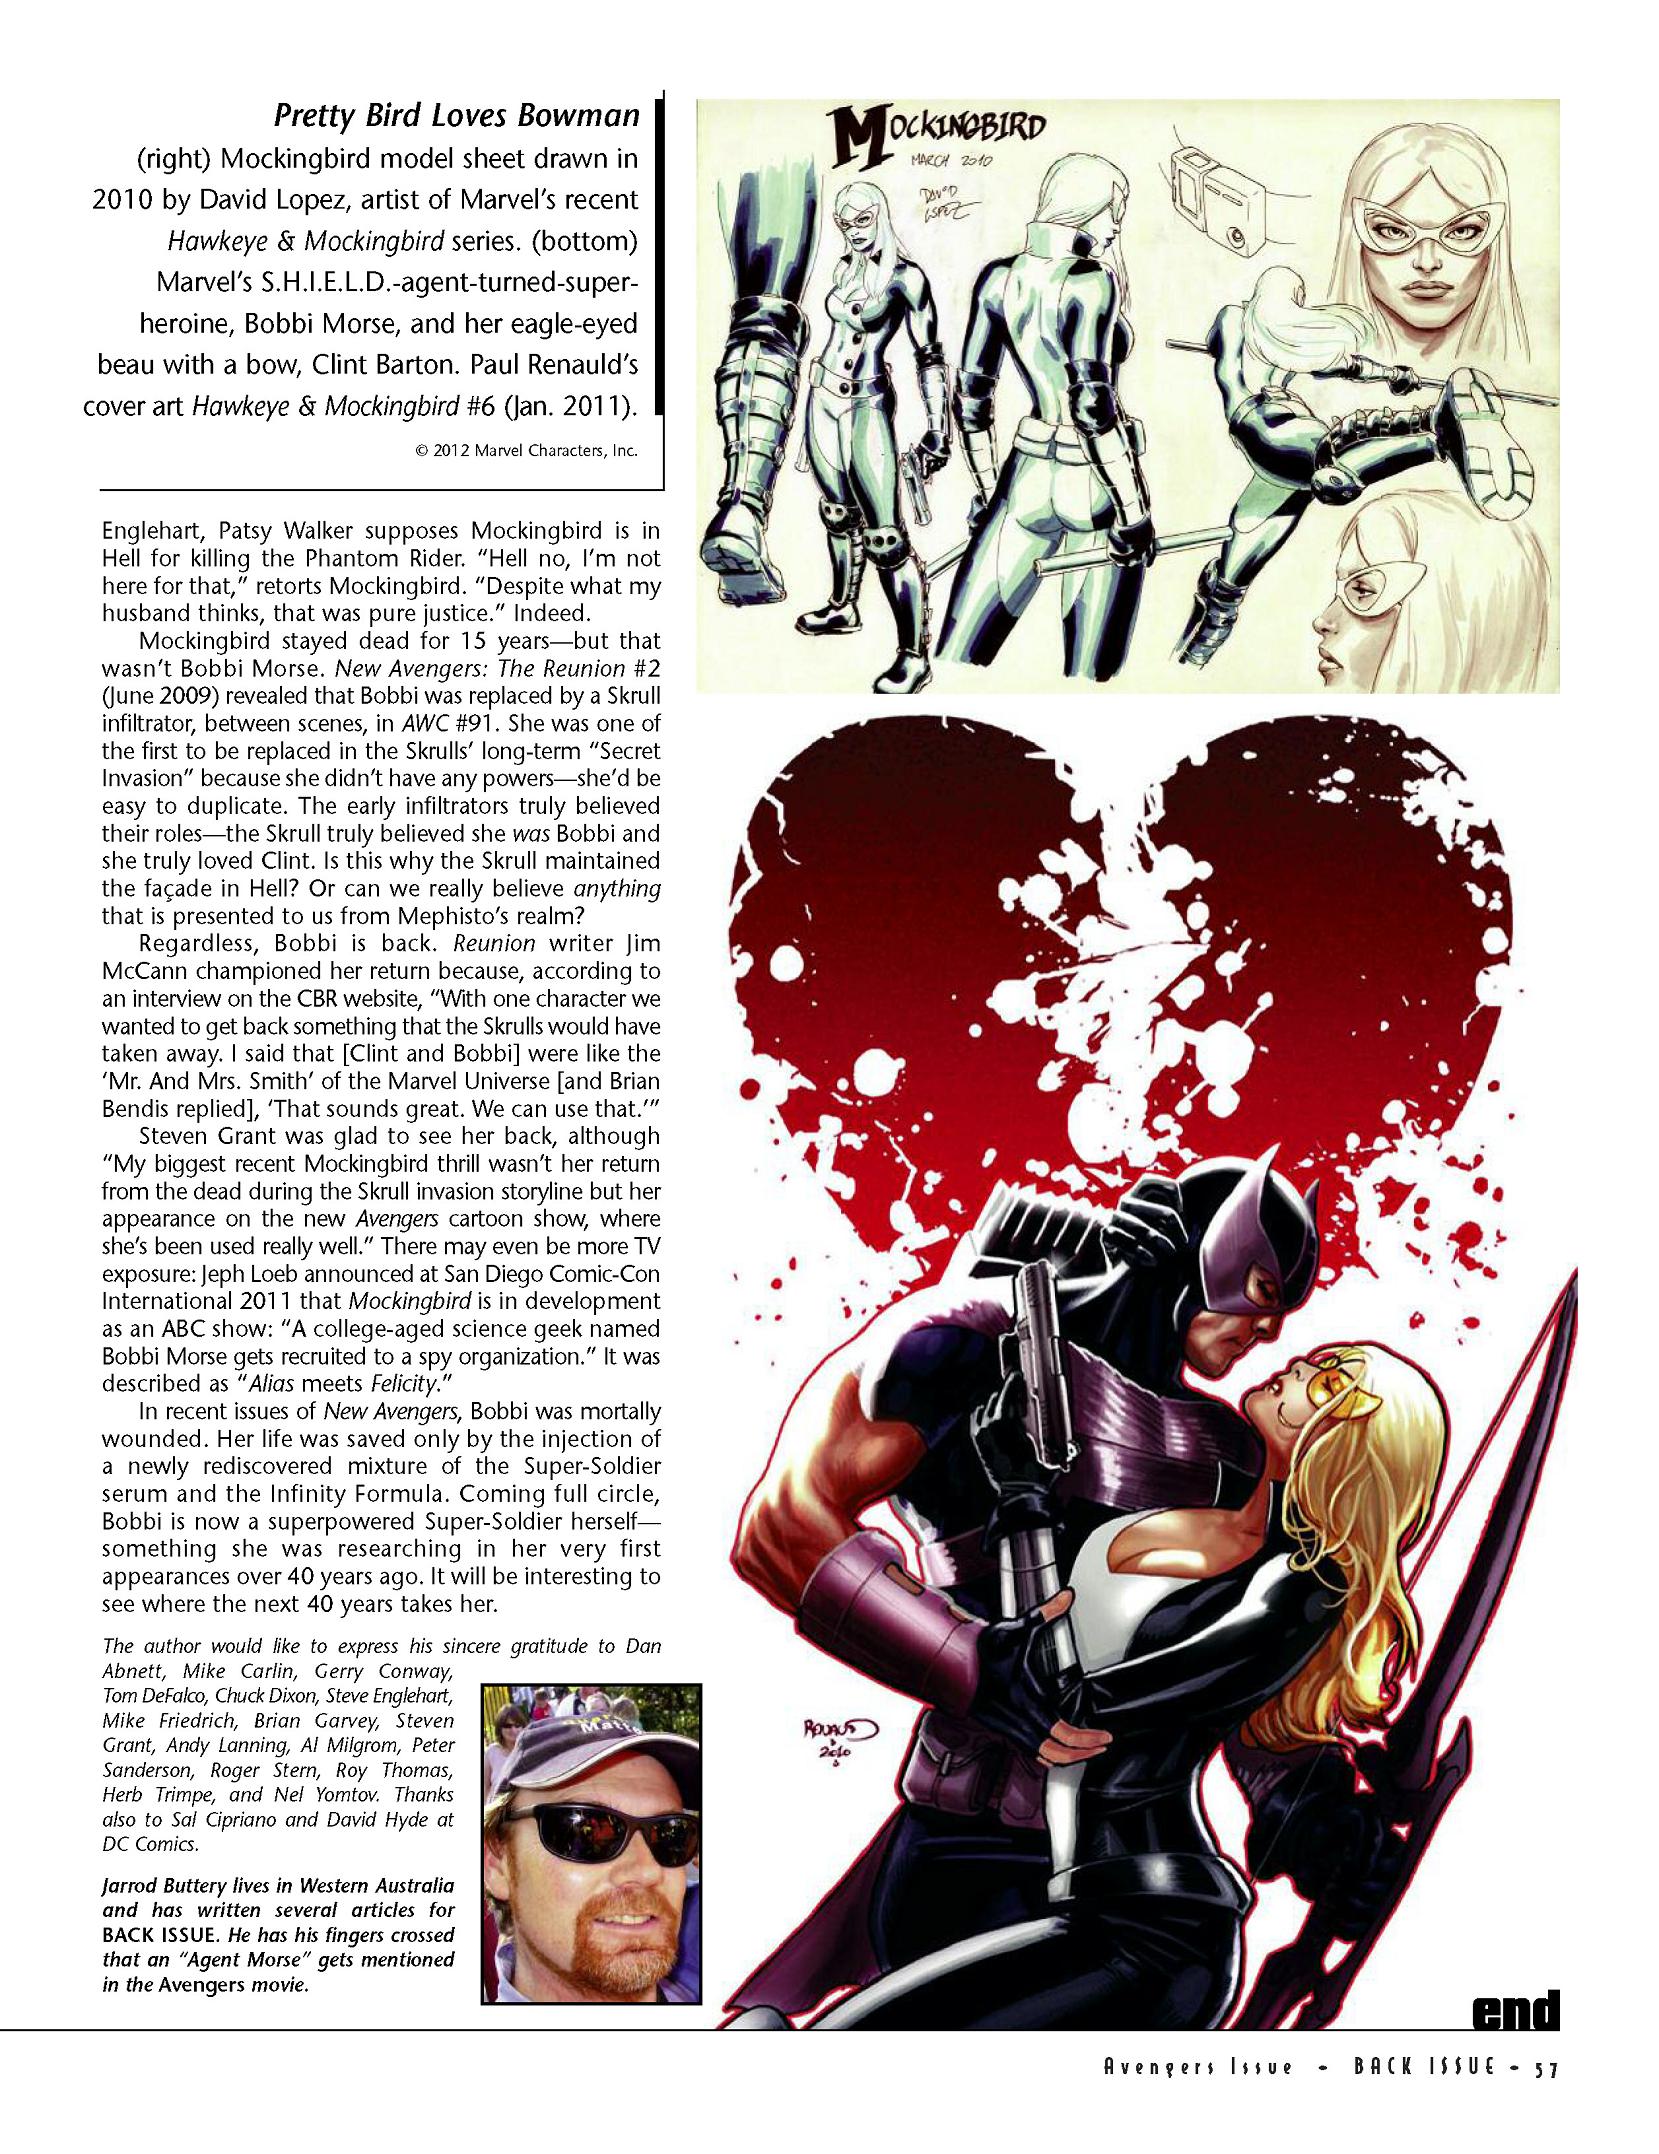 Read online Back Issue comic -  Issue #56 - 57